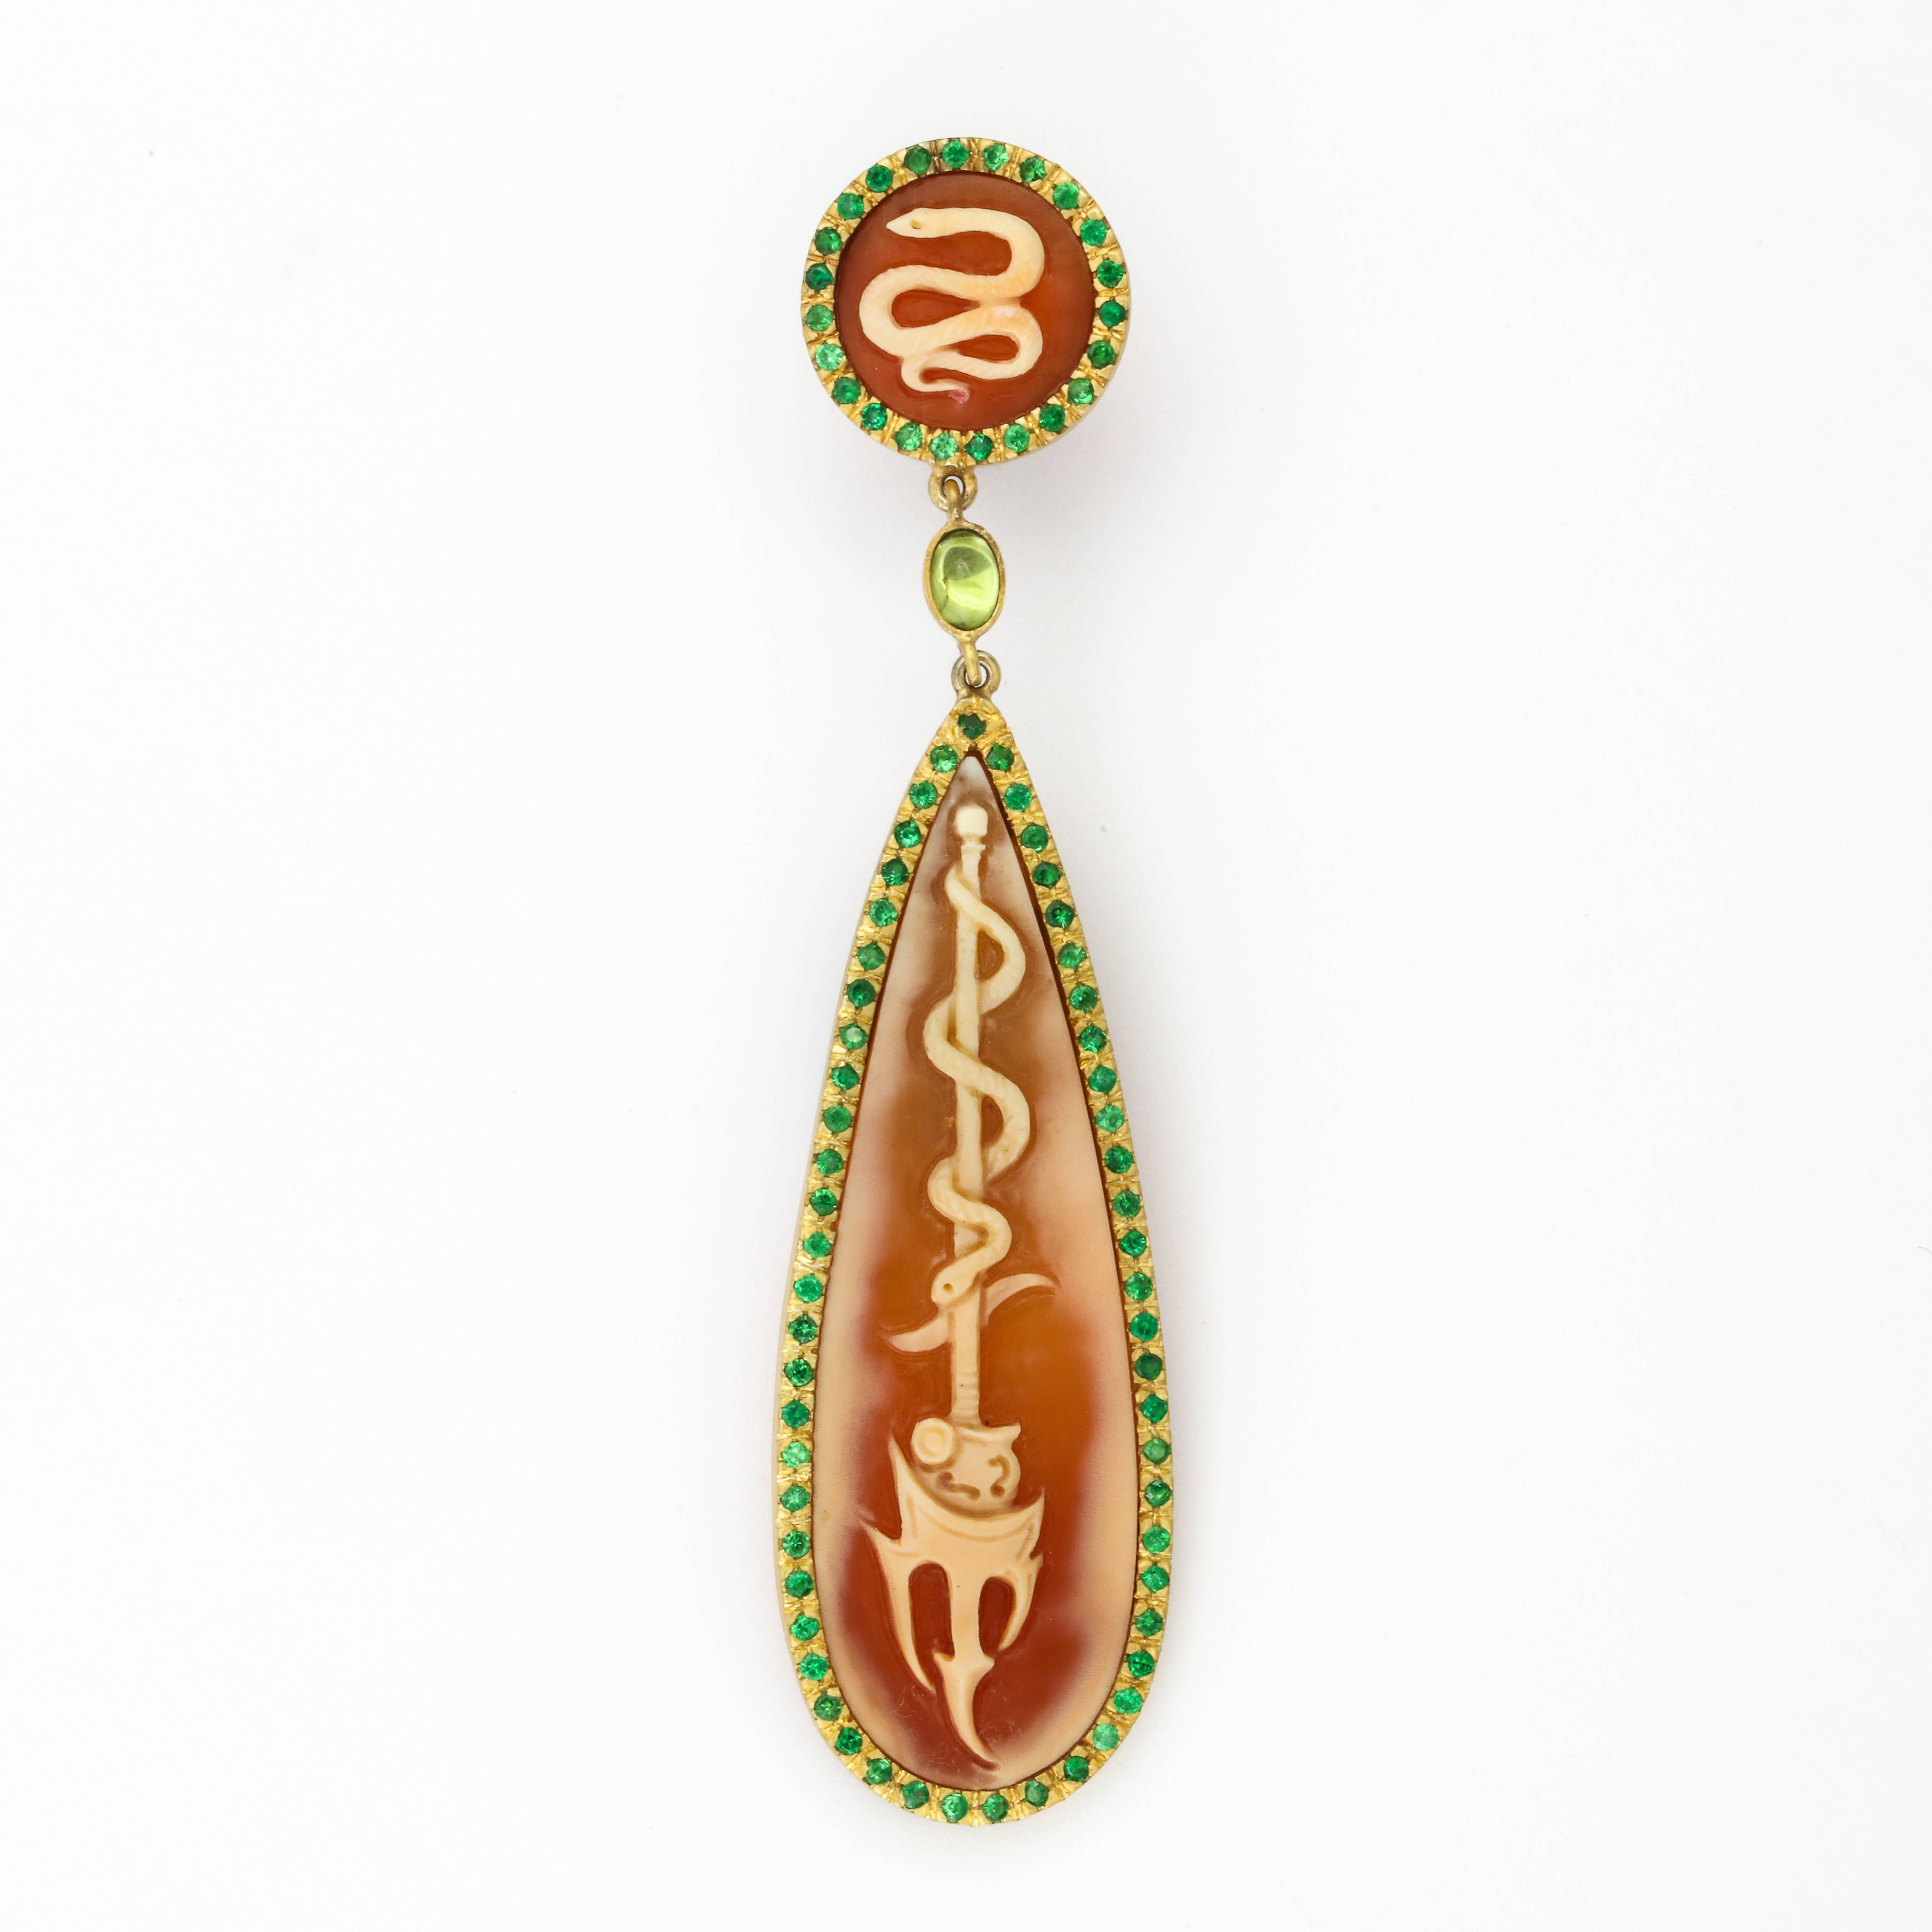 15mm/60mm carnelian cameos hand-carved, set in sterling silver rose rhodium plated, with peridots and tsavorites.